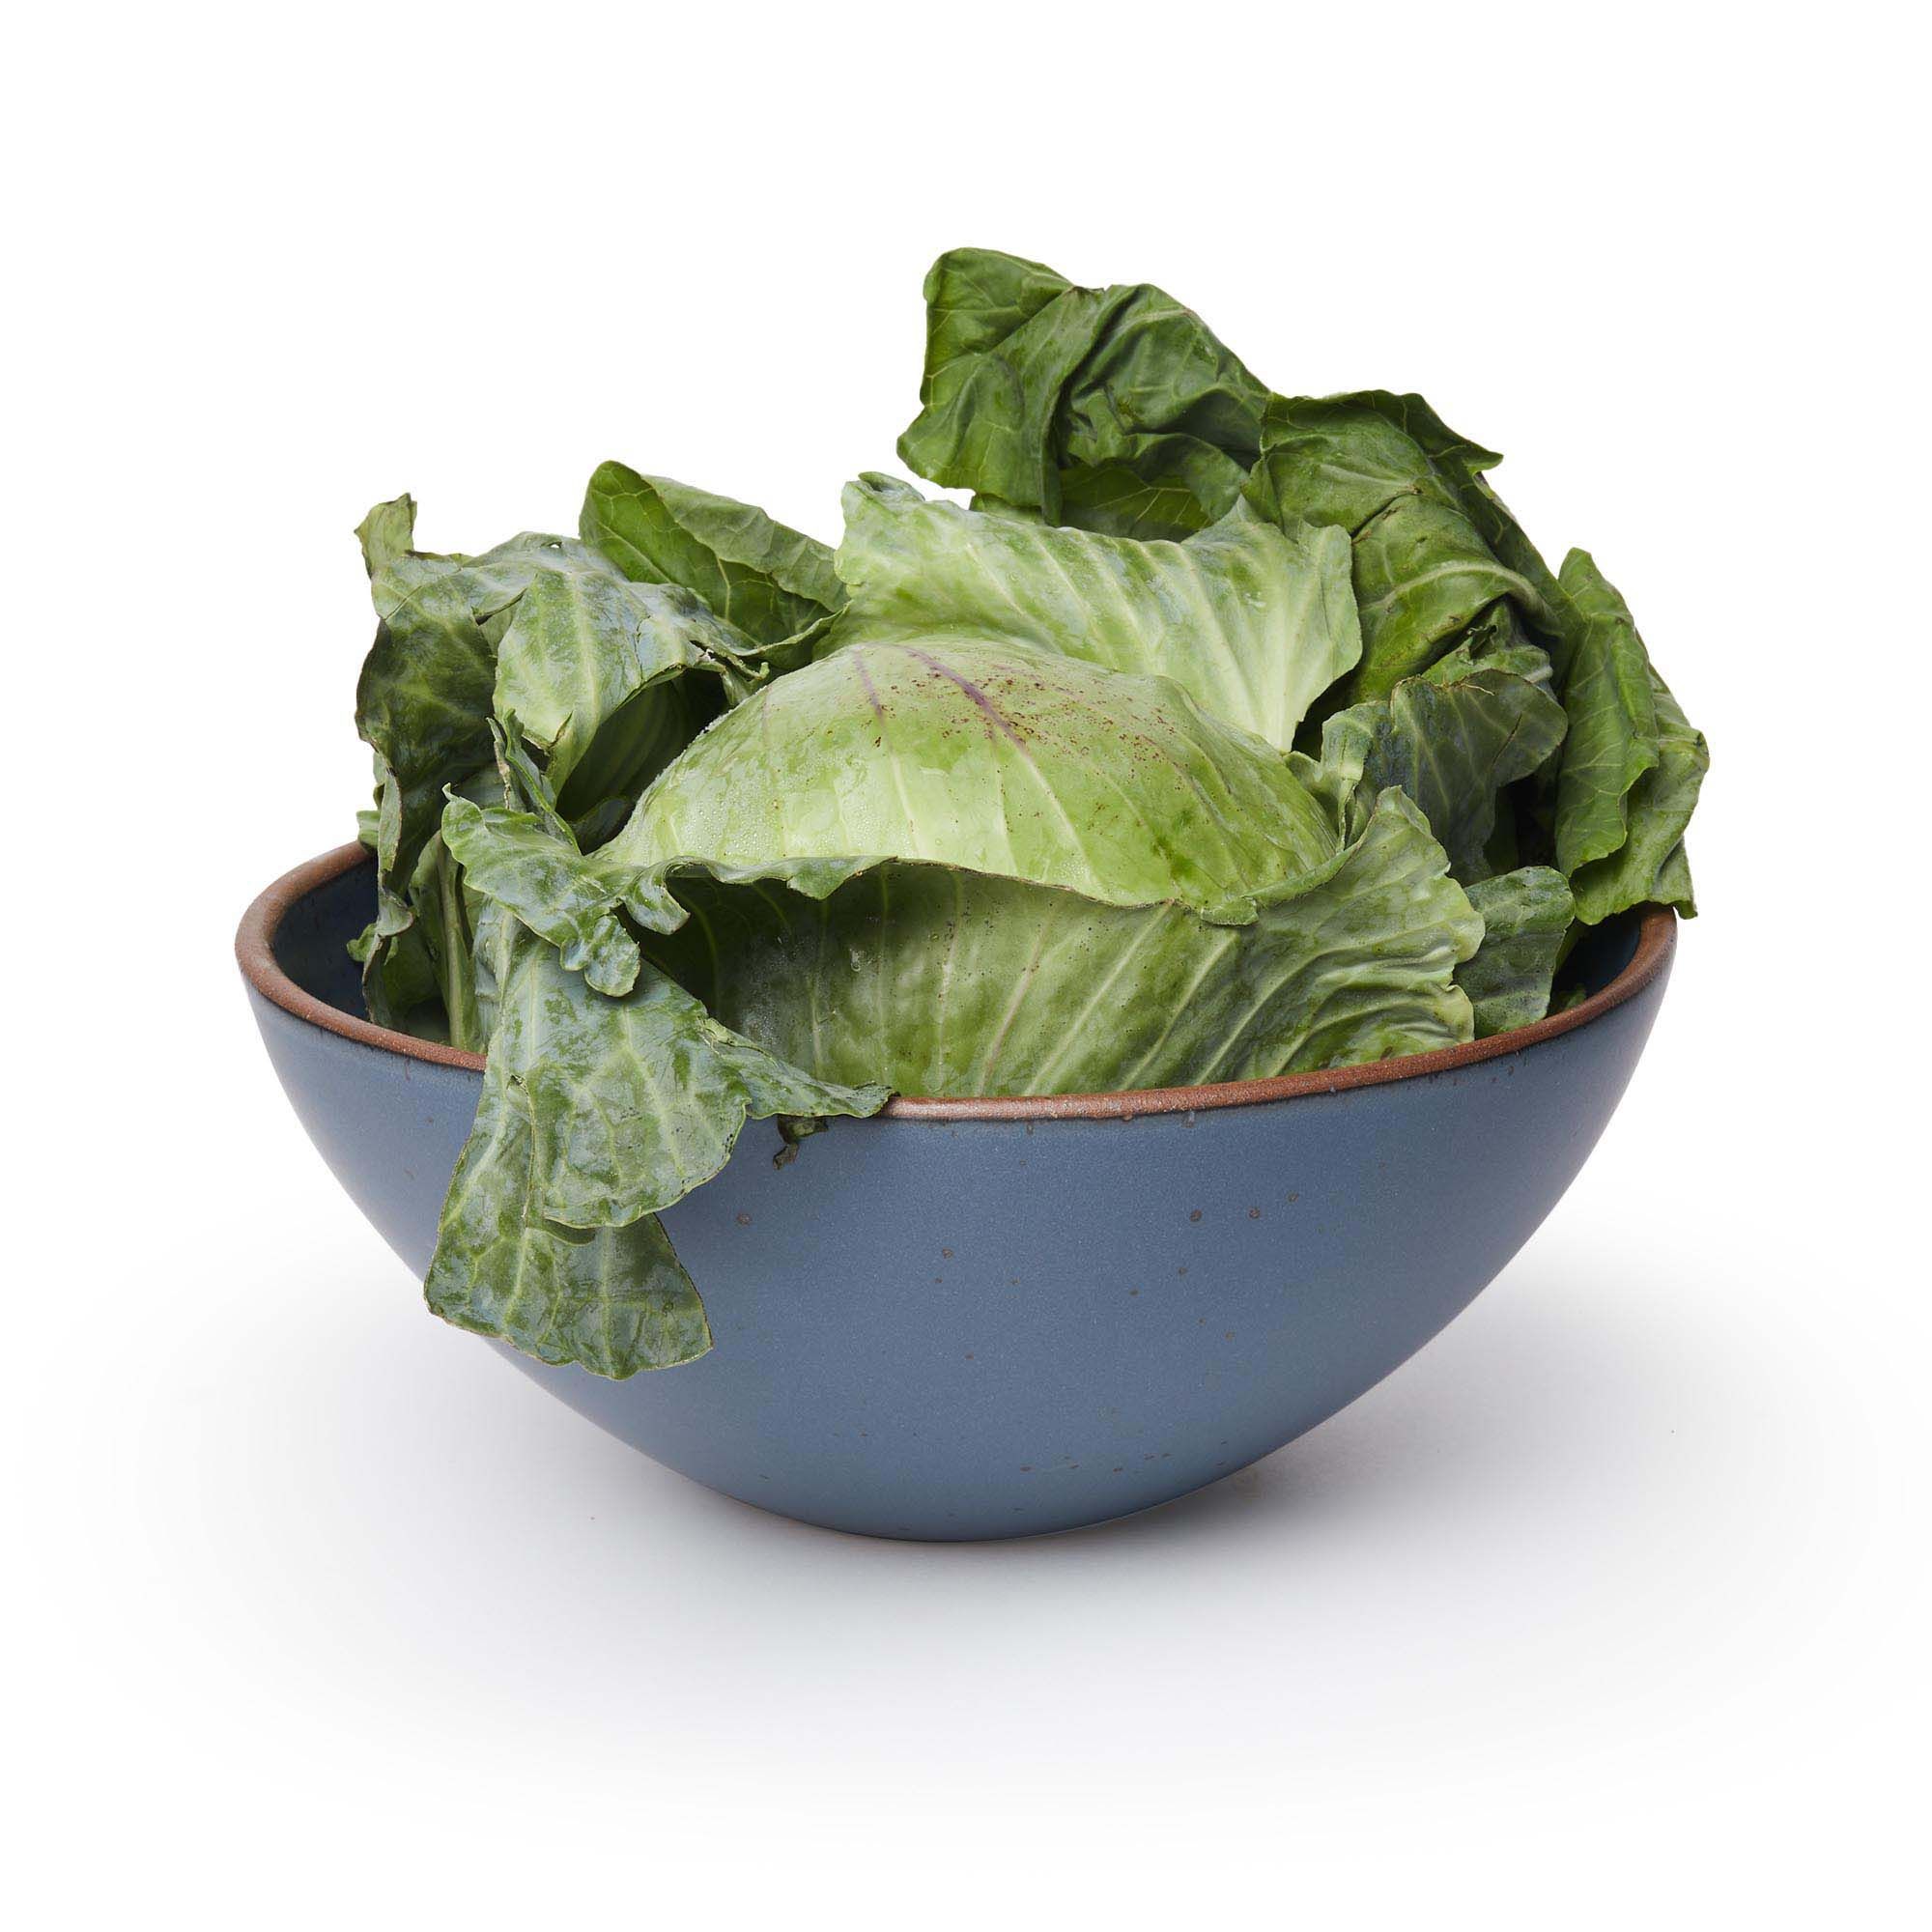 A large ceramic mixing bowl in a toned-down navy color featuring iron speckles and an unglazed rim, filled with lettuce